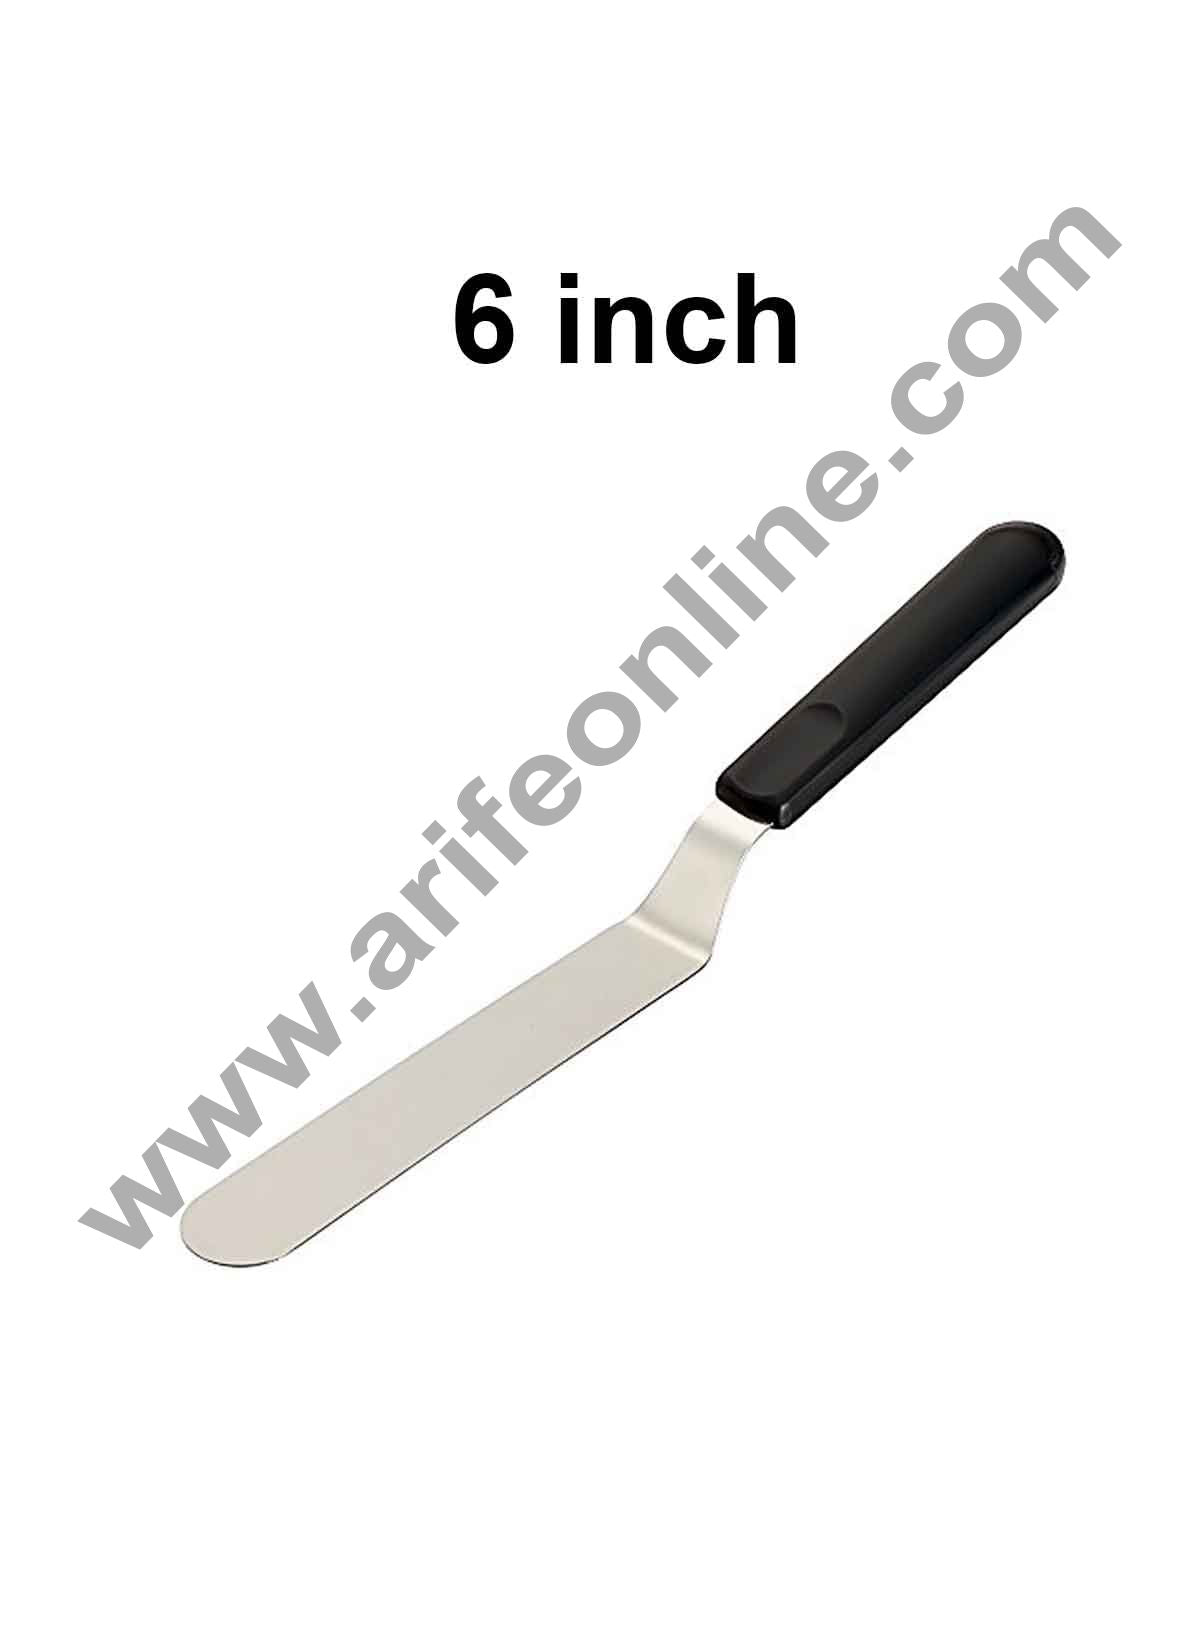 Buy Multipurpose Pizza Turner Solid or Pie Shovel or Cake Lifter - Angular  - 10 inch online in India at best price